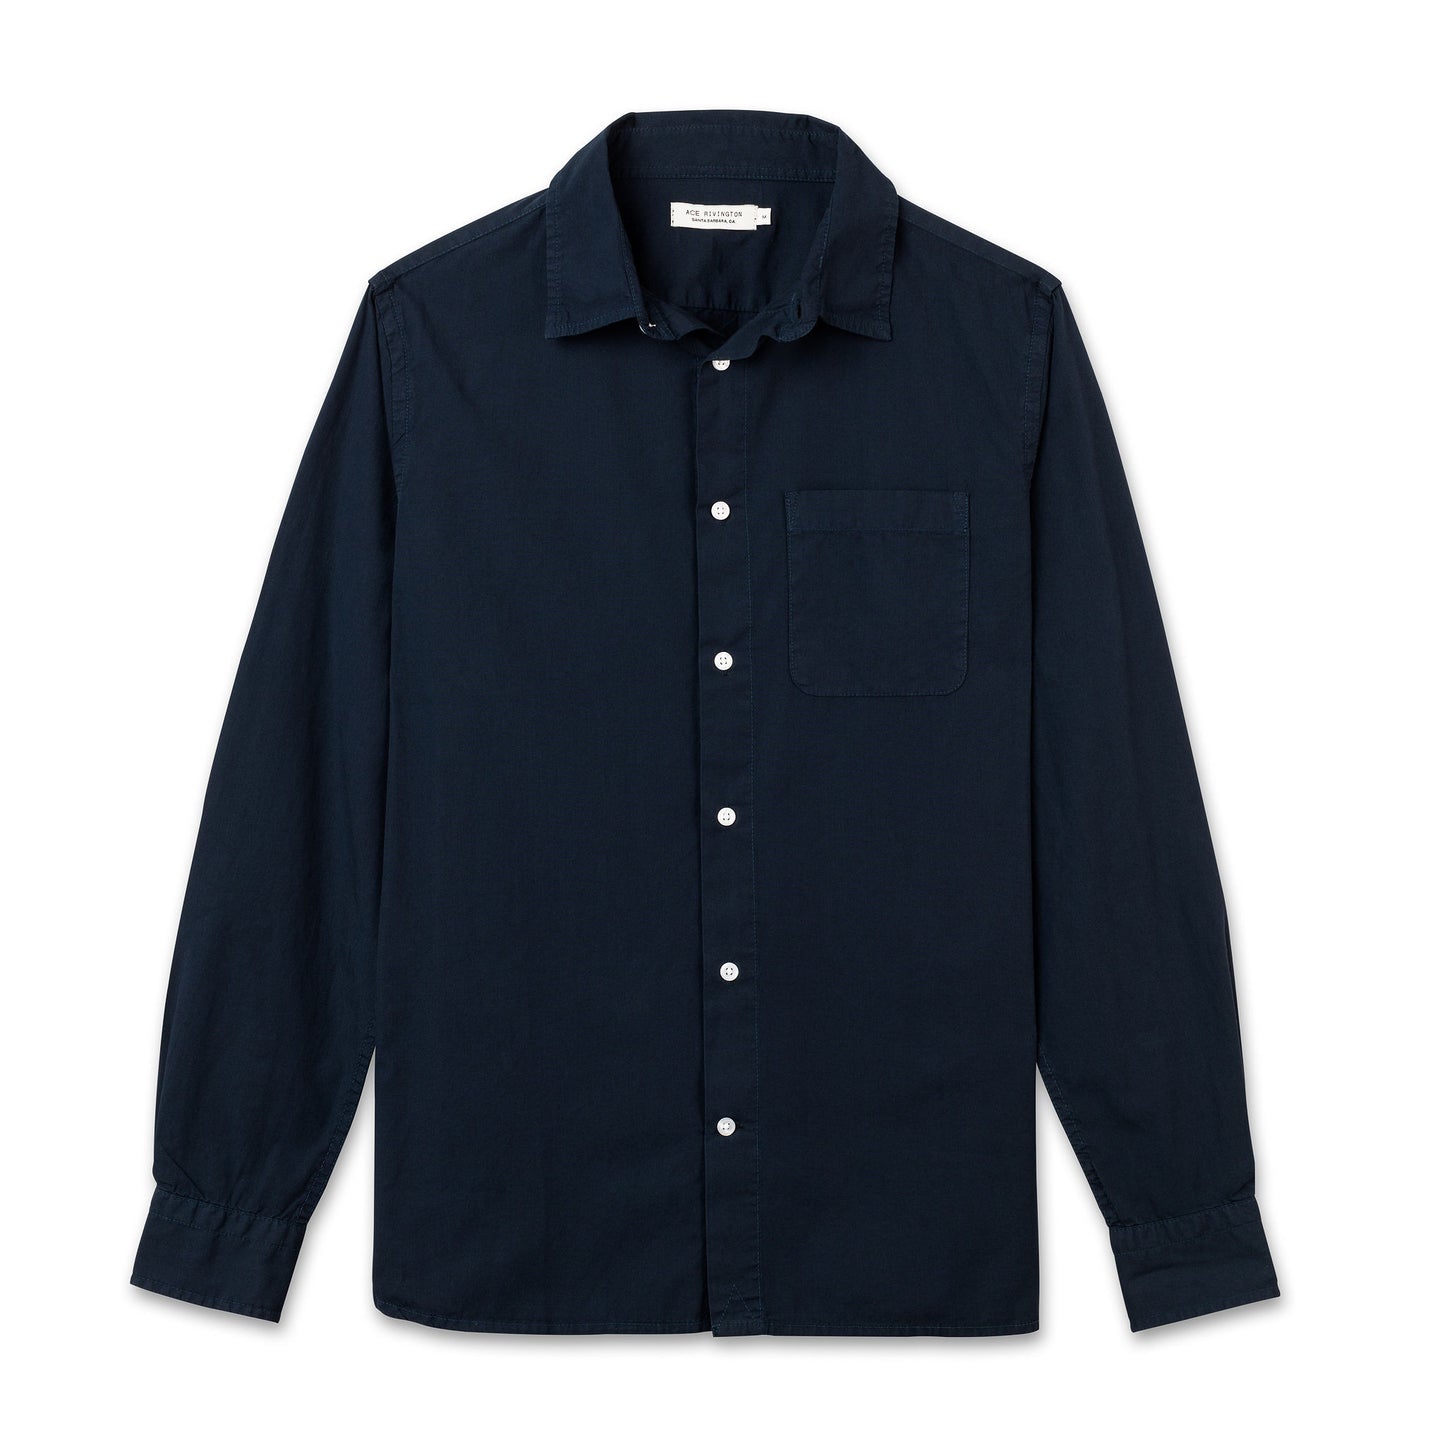 front of men's navy long sleeve tailored poplin shirt with pearl buttons and a single pocket in shorter-hem height option